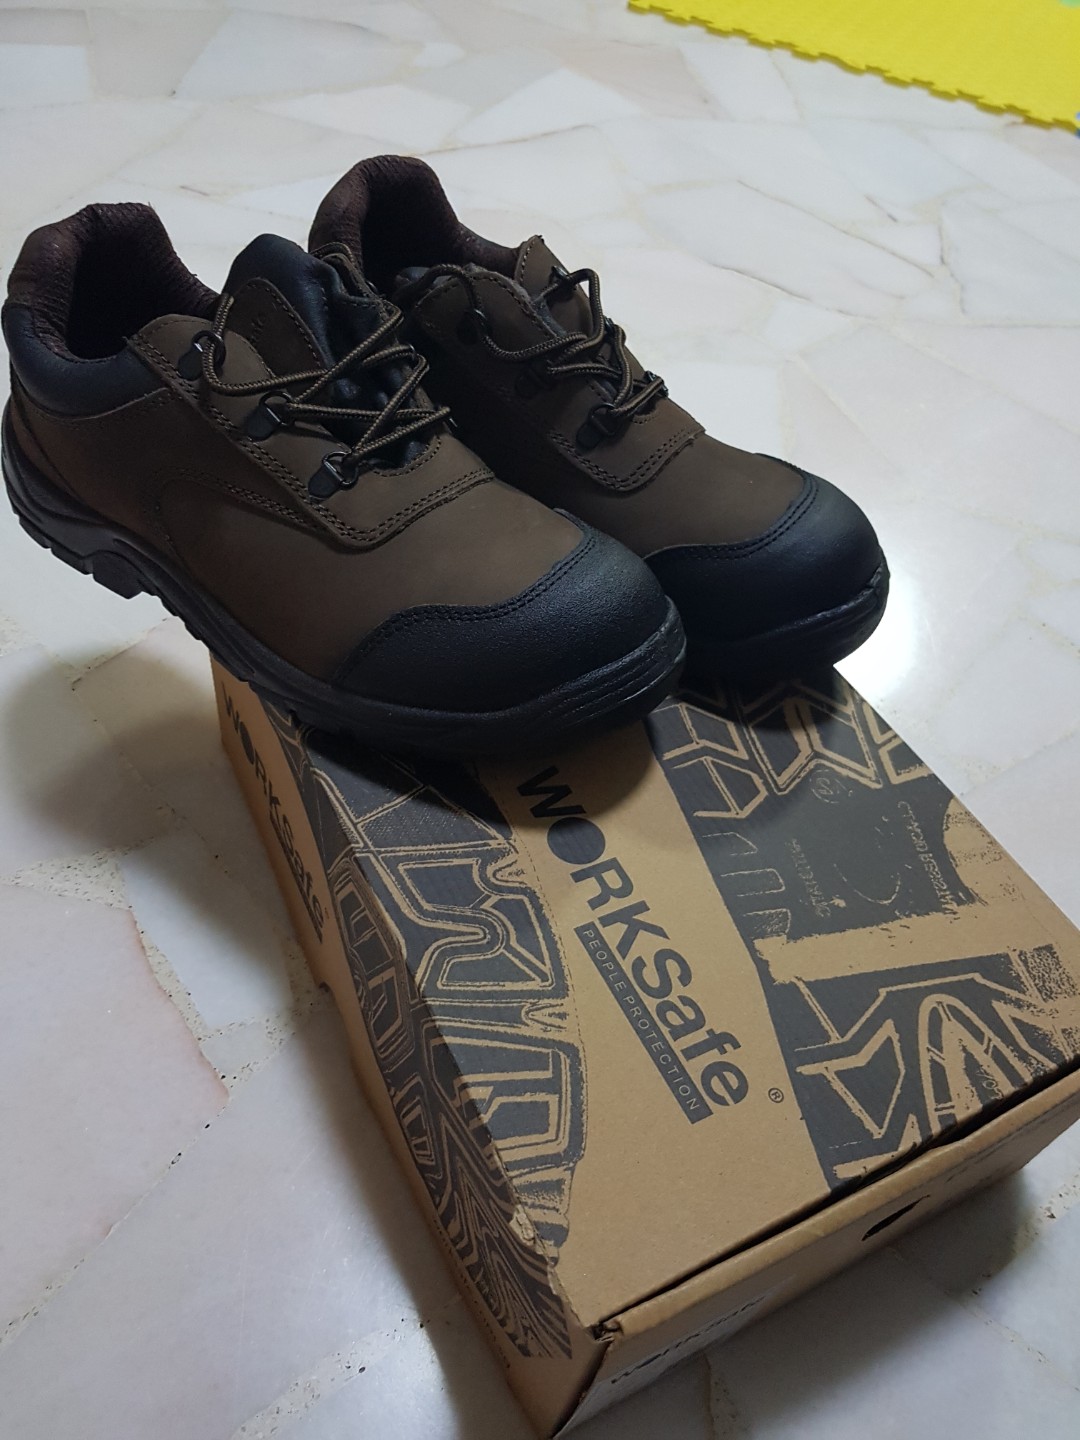 worksafe safety shoes